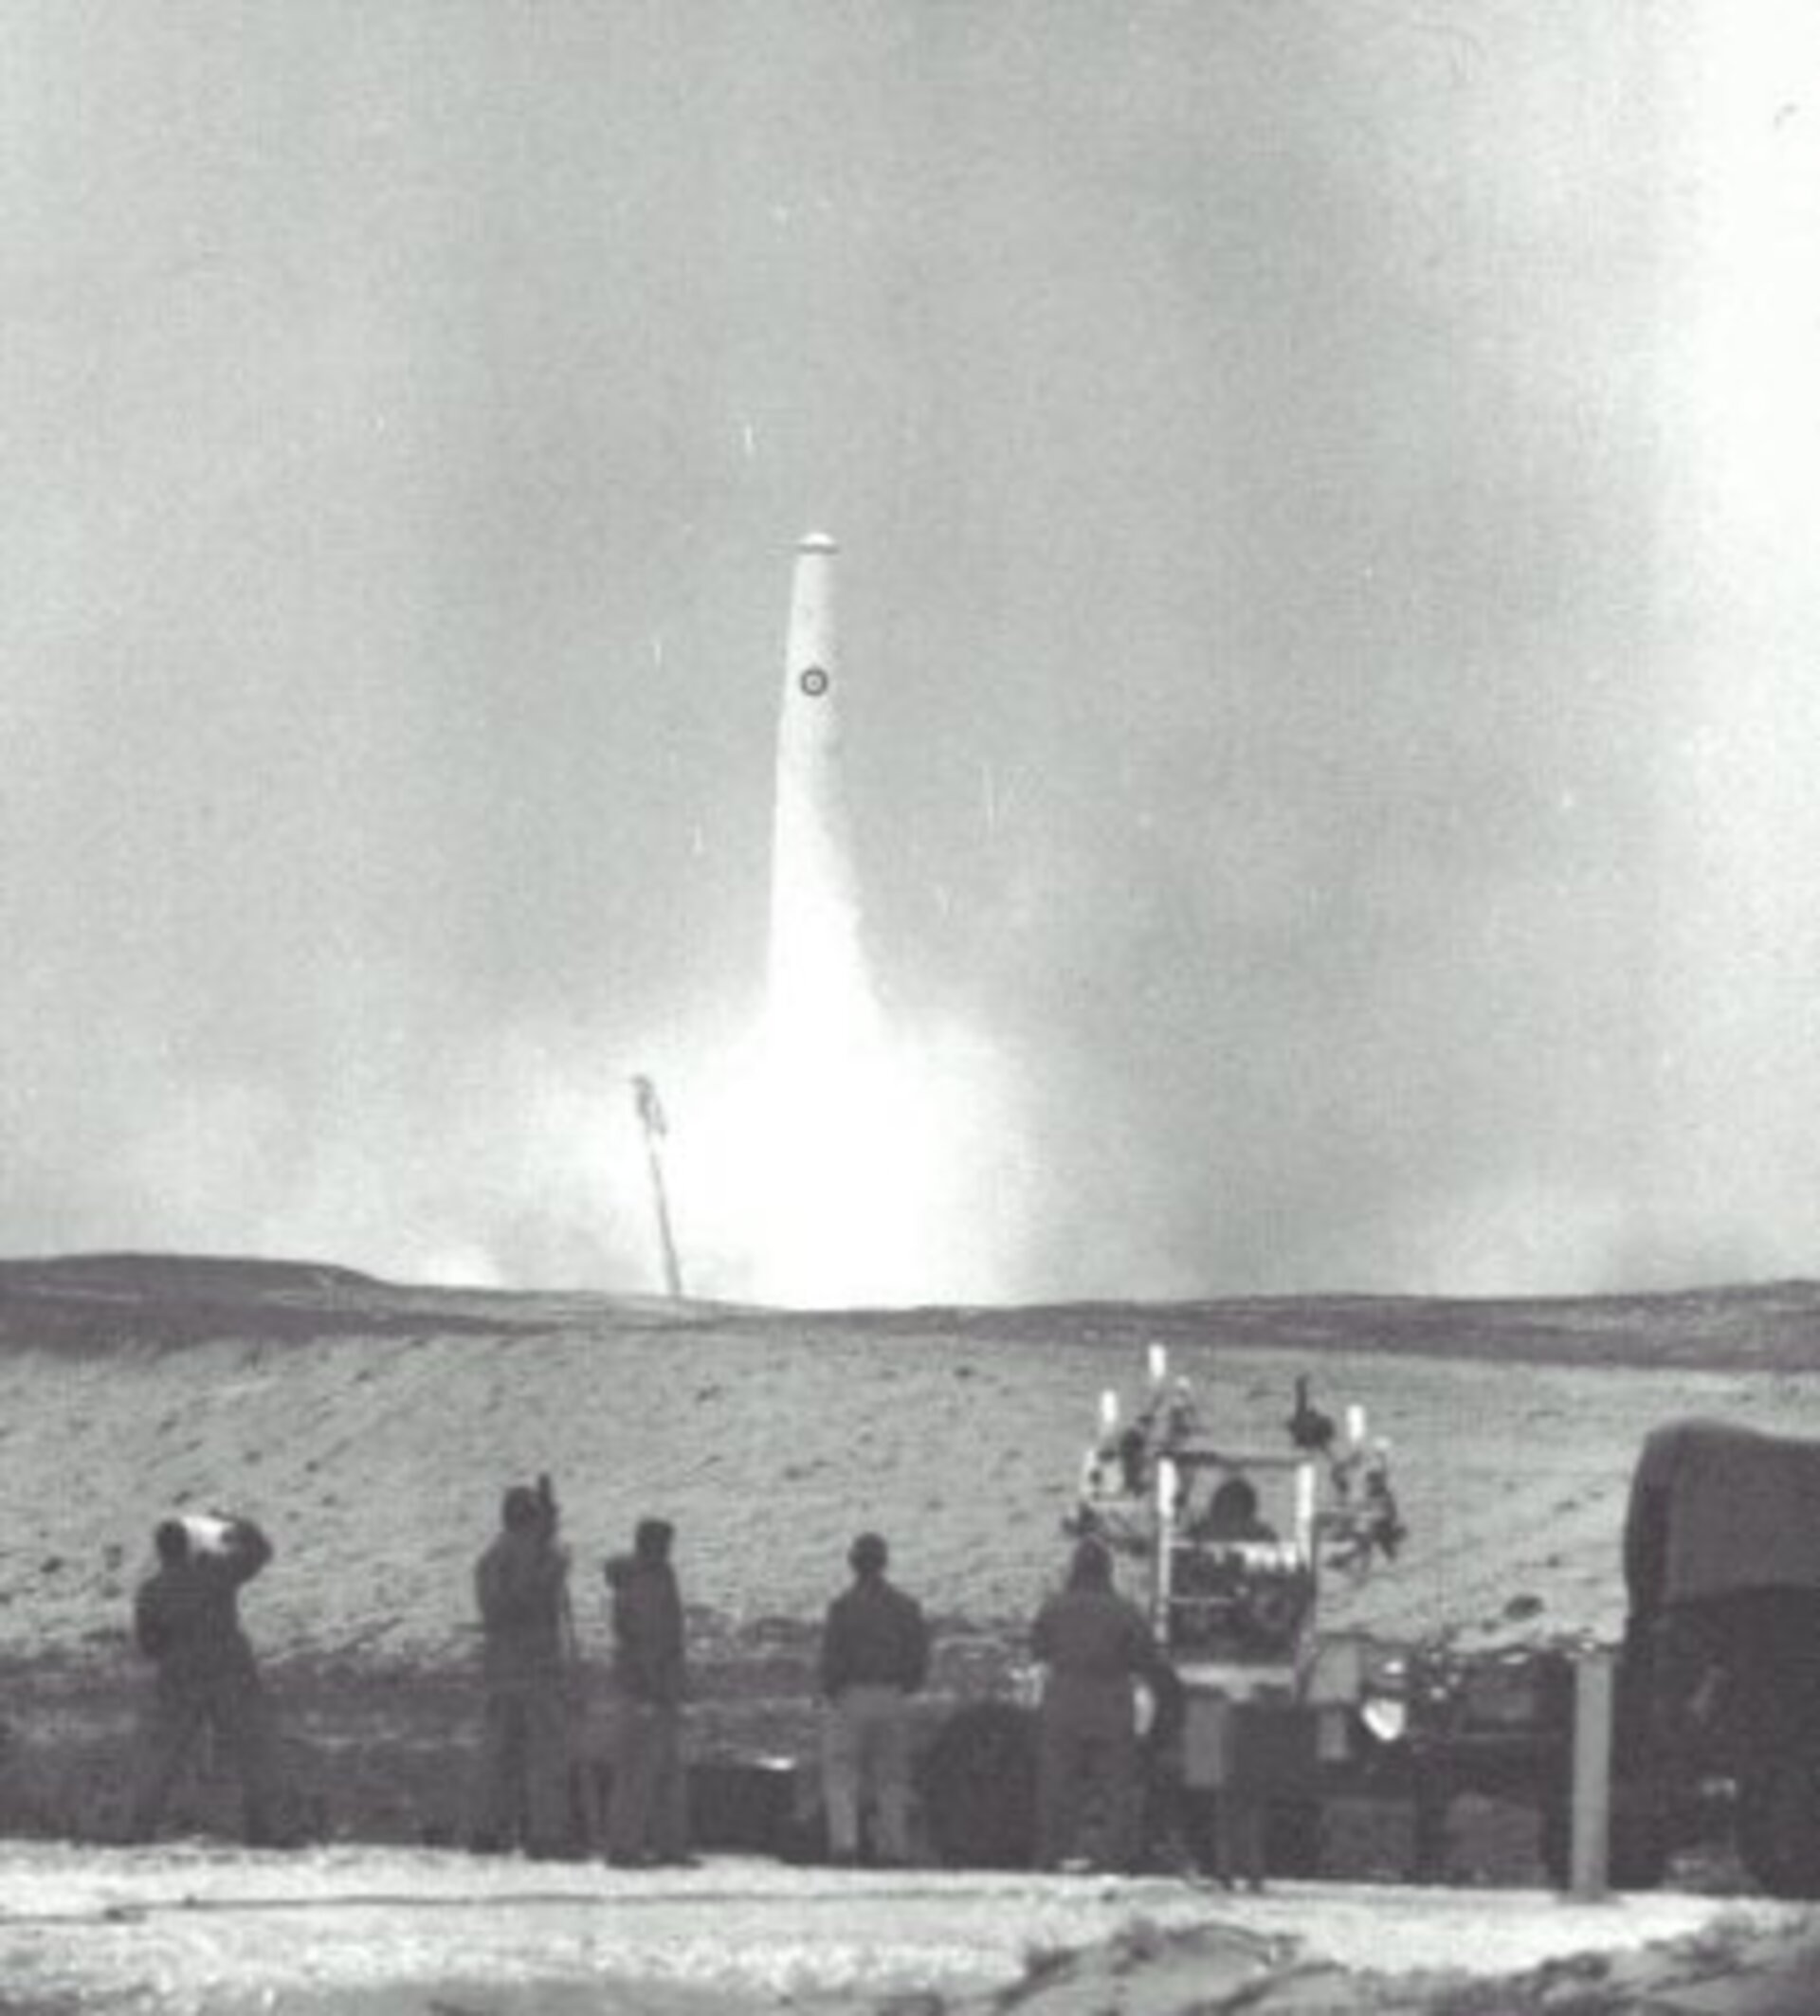 Thor missile being launched